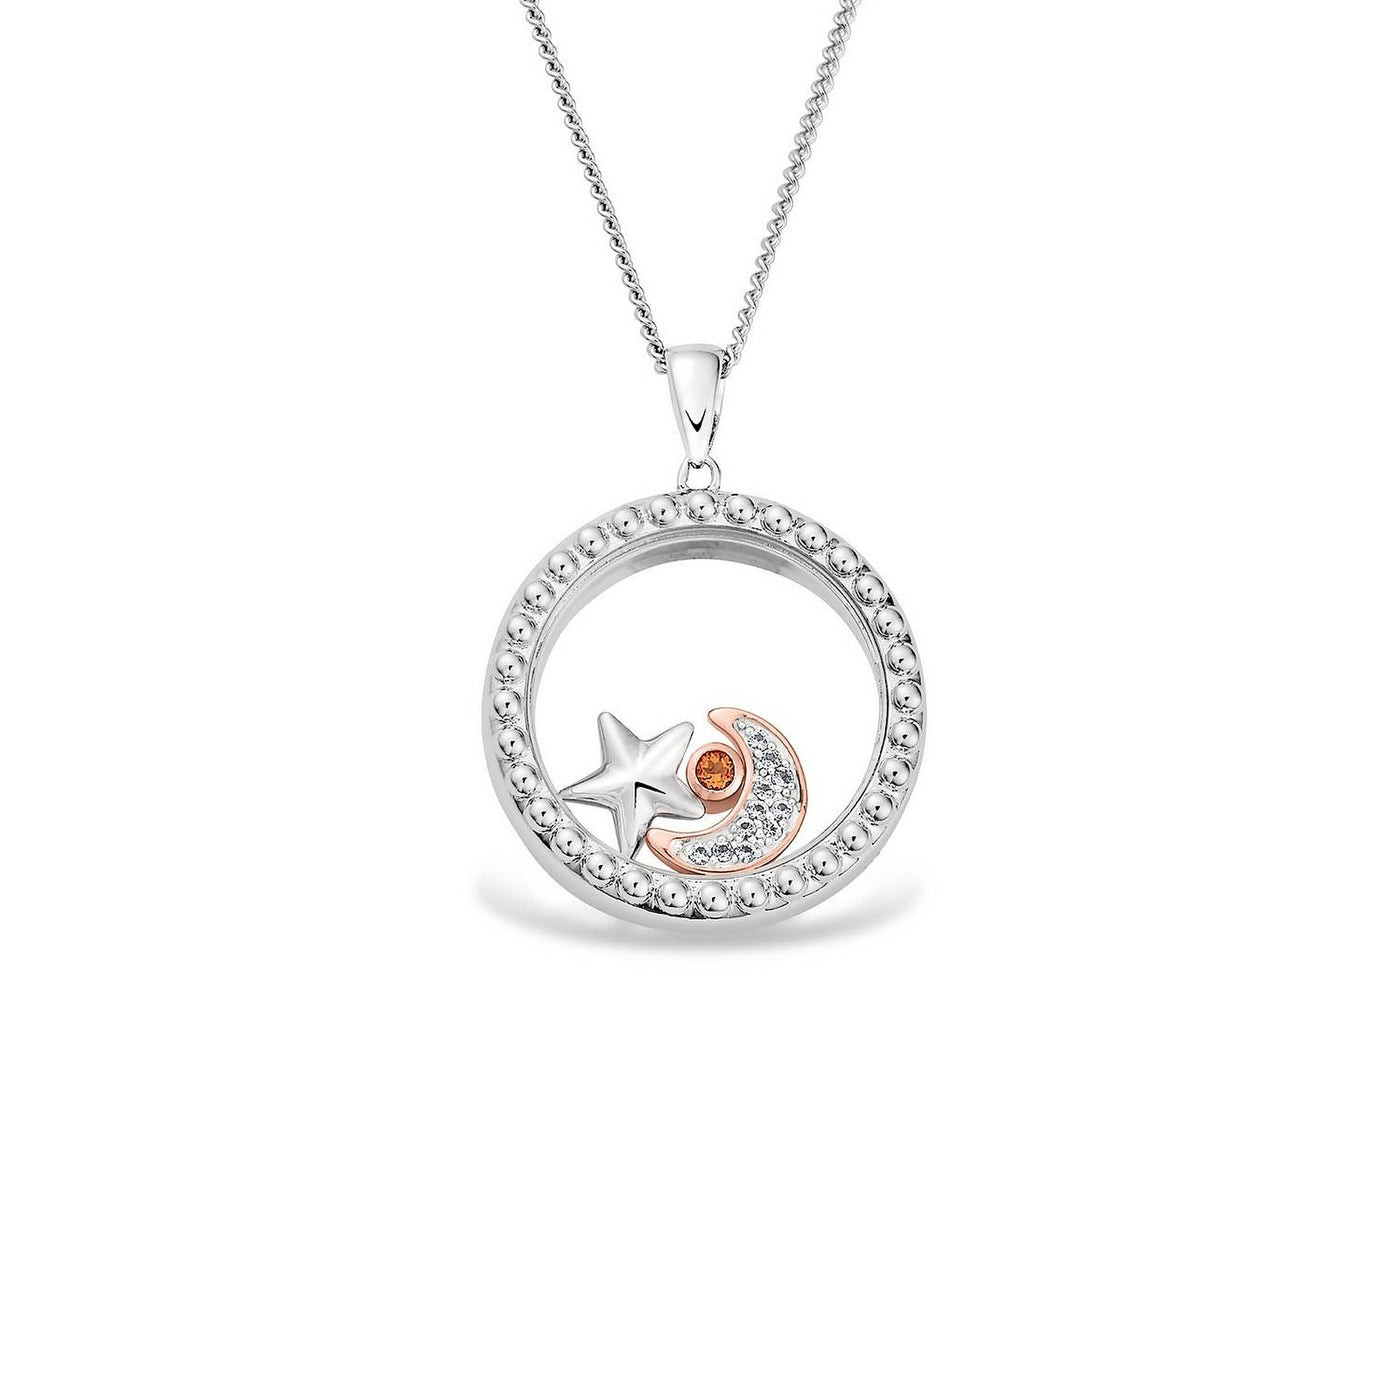 Clogau Out of This World Inner Charm Necklace - 3SICLP25